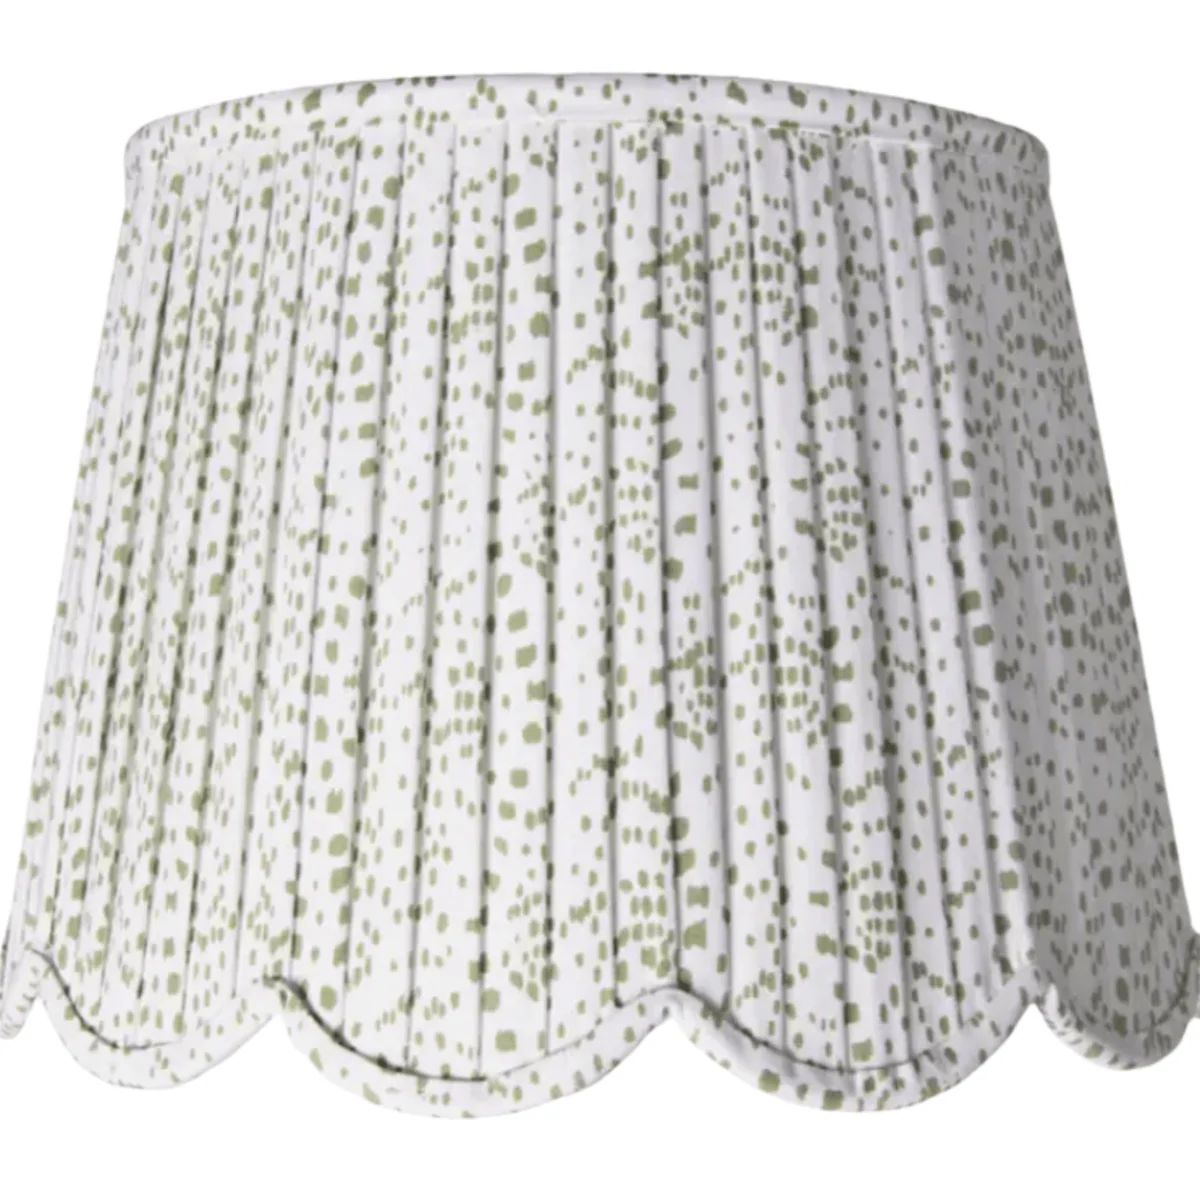 Dark Celadon & White Scalloped Pleated Lampshade | The Well Appointed House, LLC